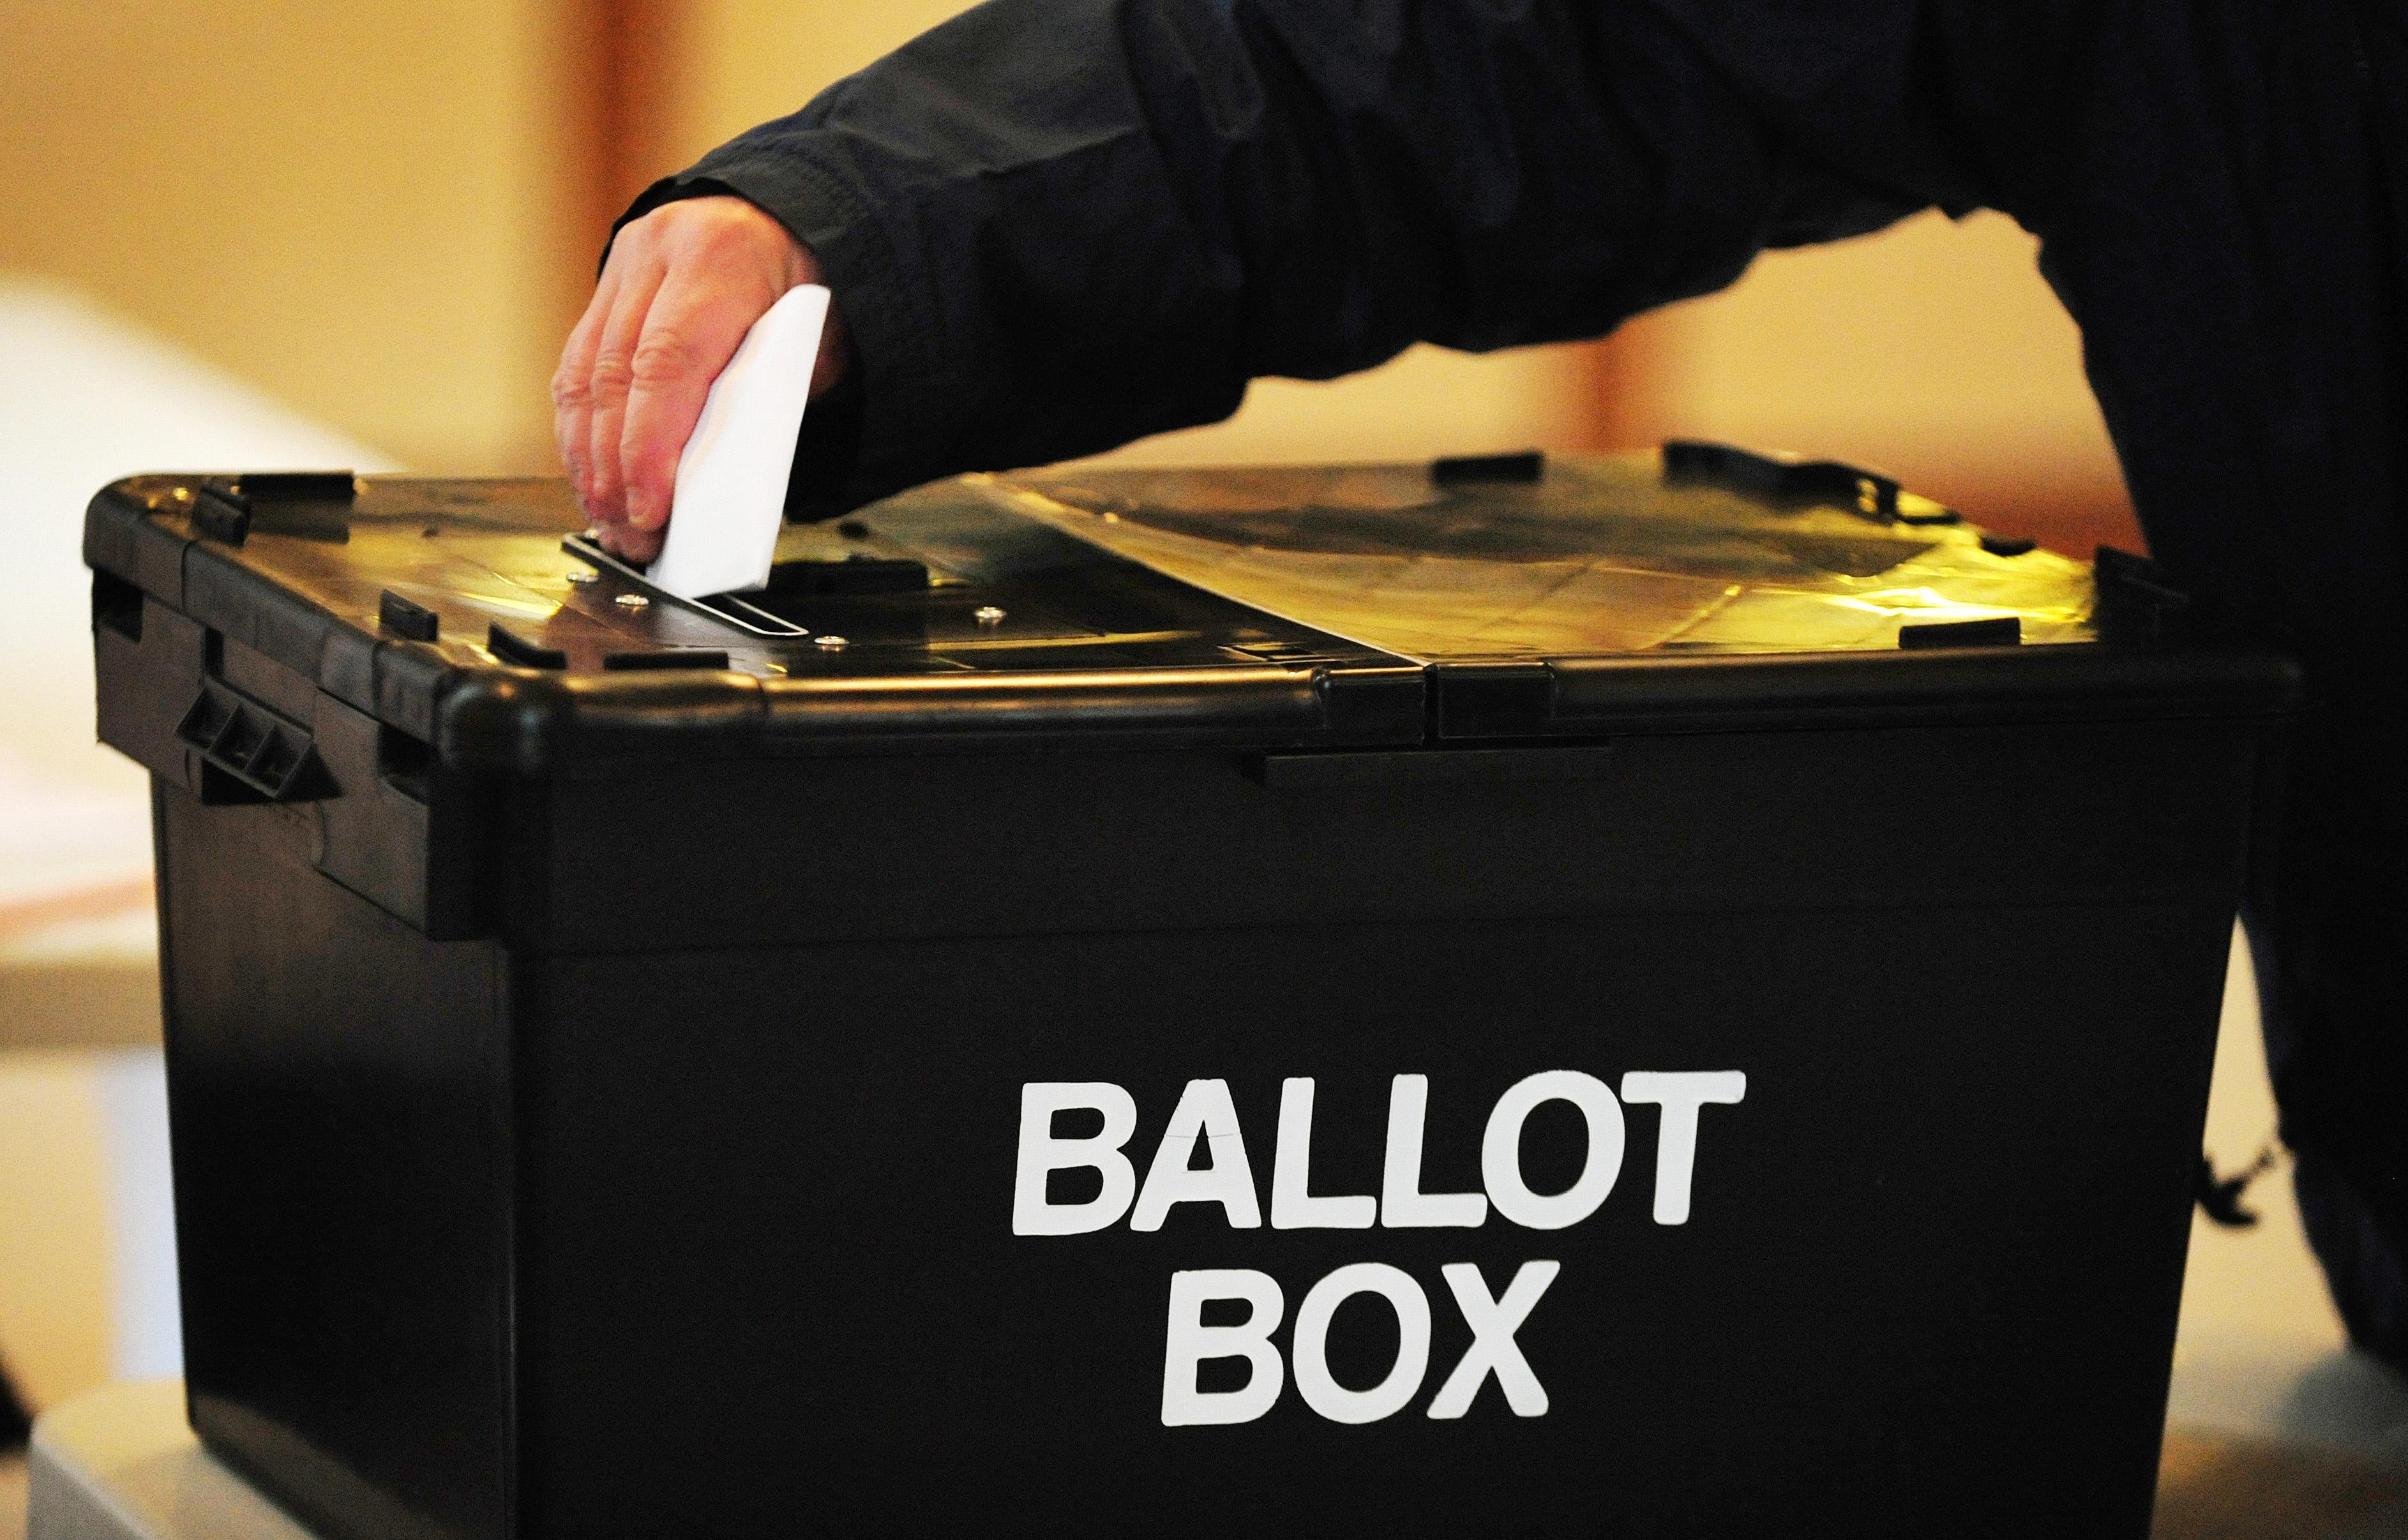 Most council ballots in England use a straight first-past-the-post system